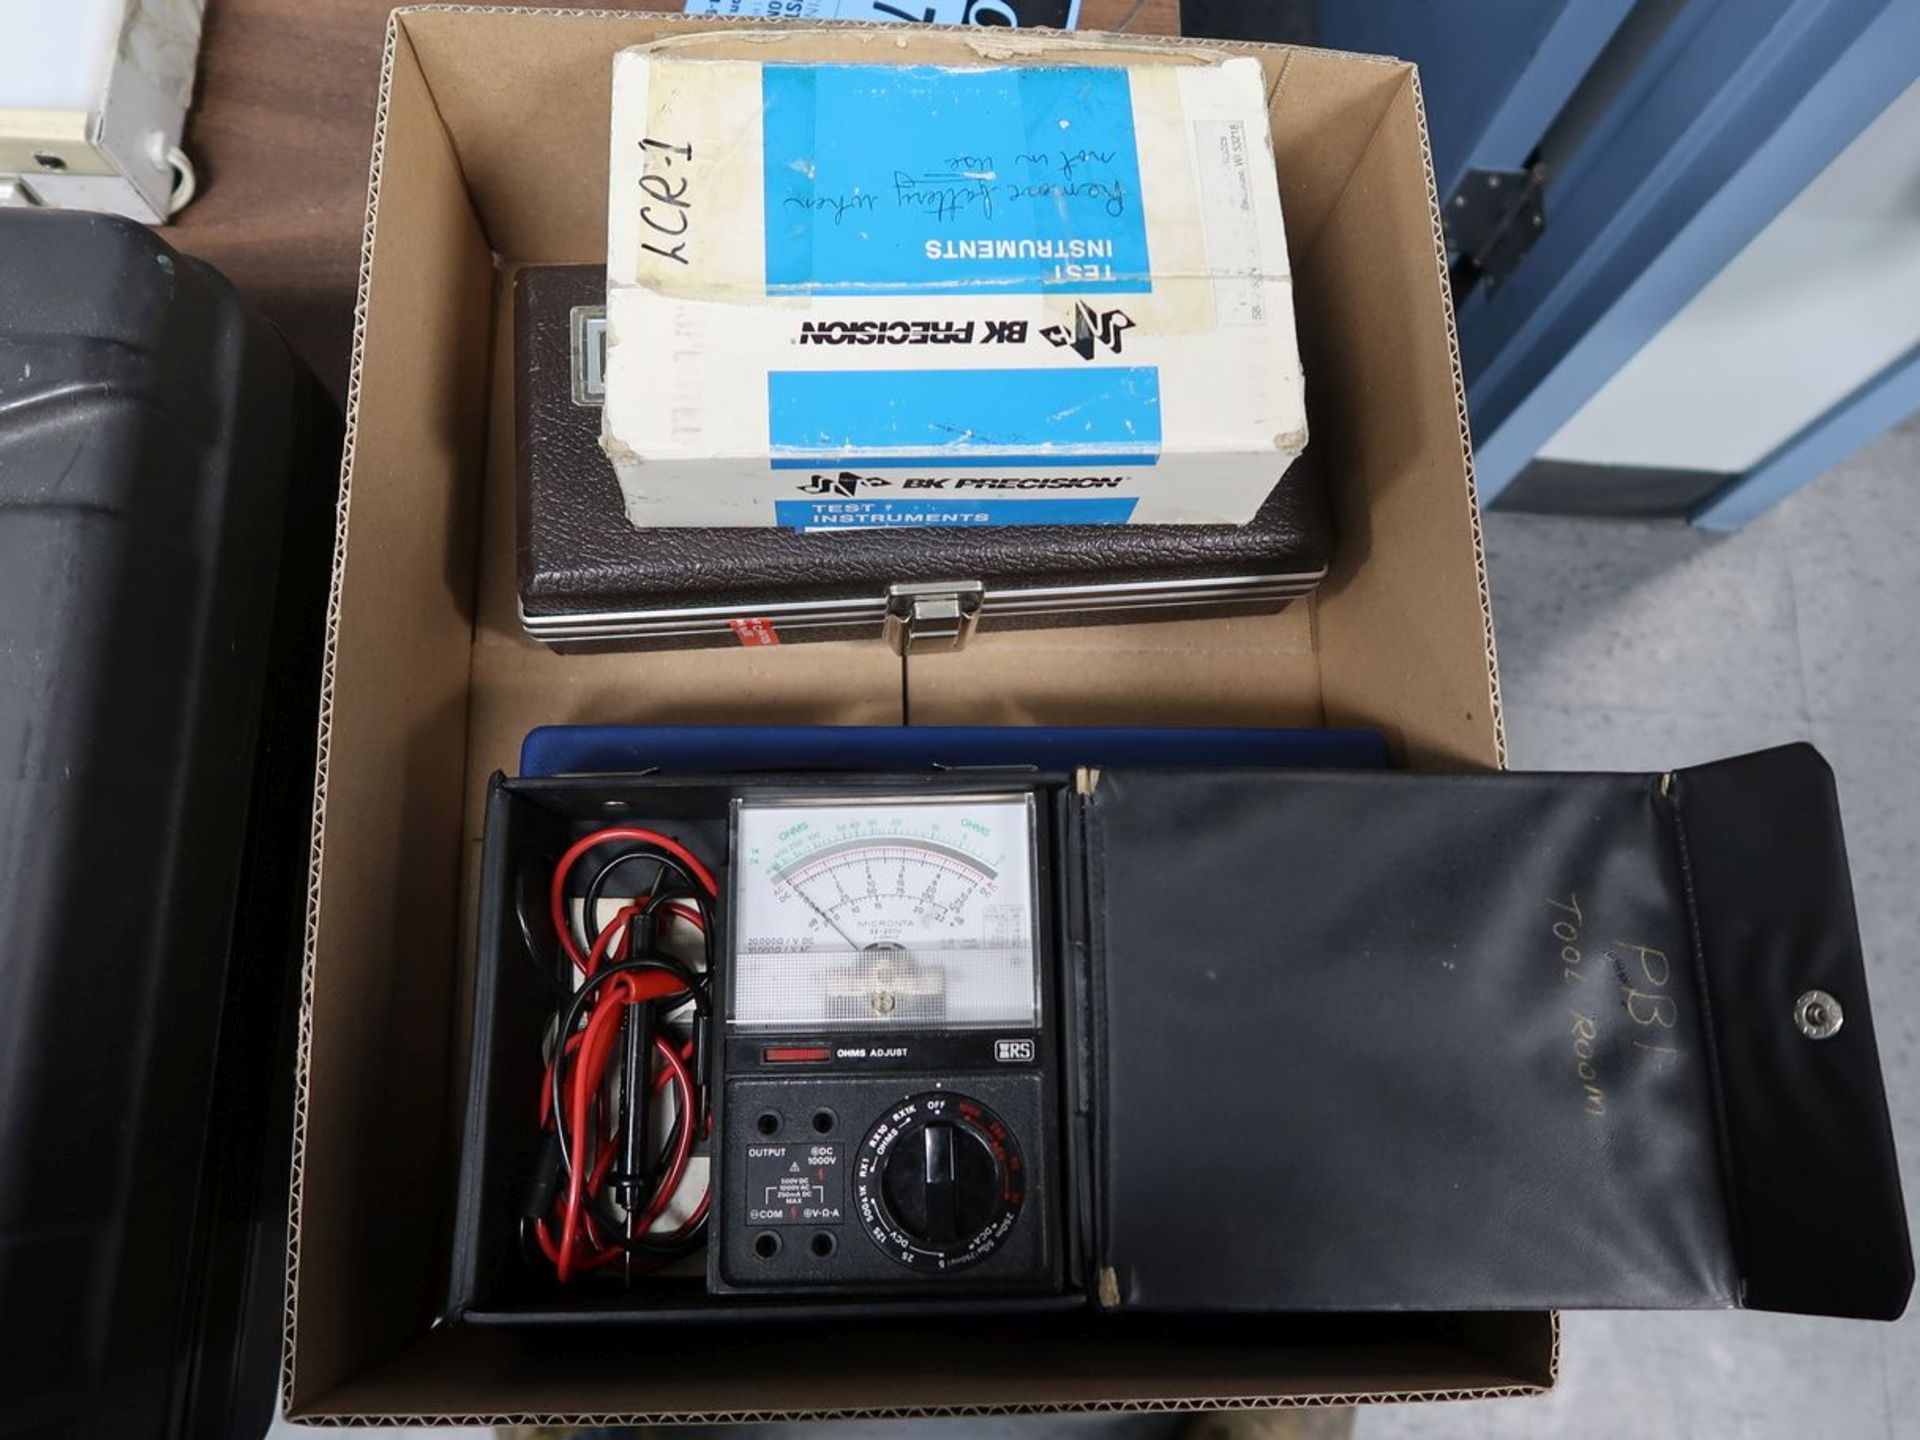 TEST METERS INCLUDING; LCR METER, OHM METER, (2) FORCE GAGES - Image 5 of 6